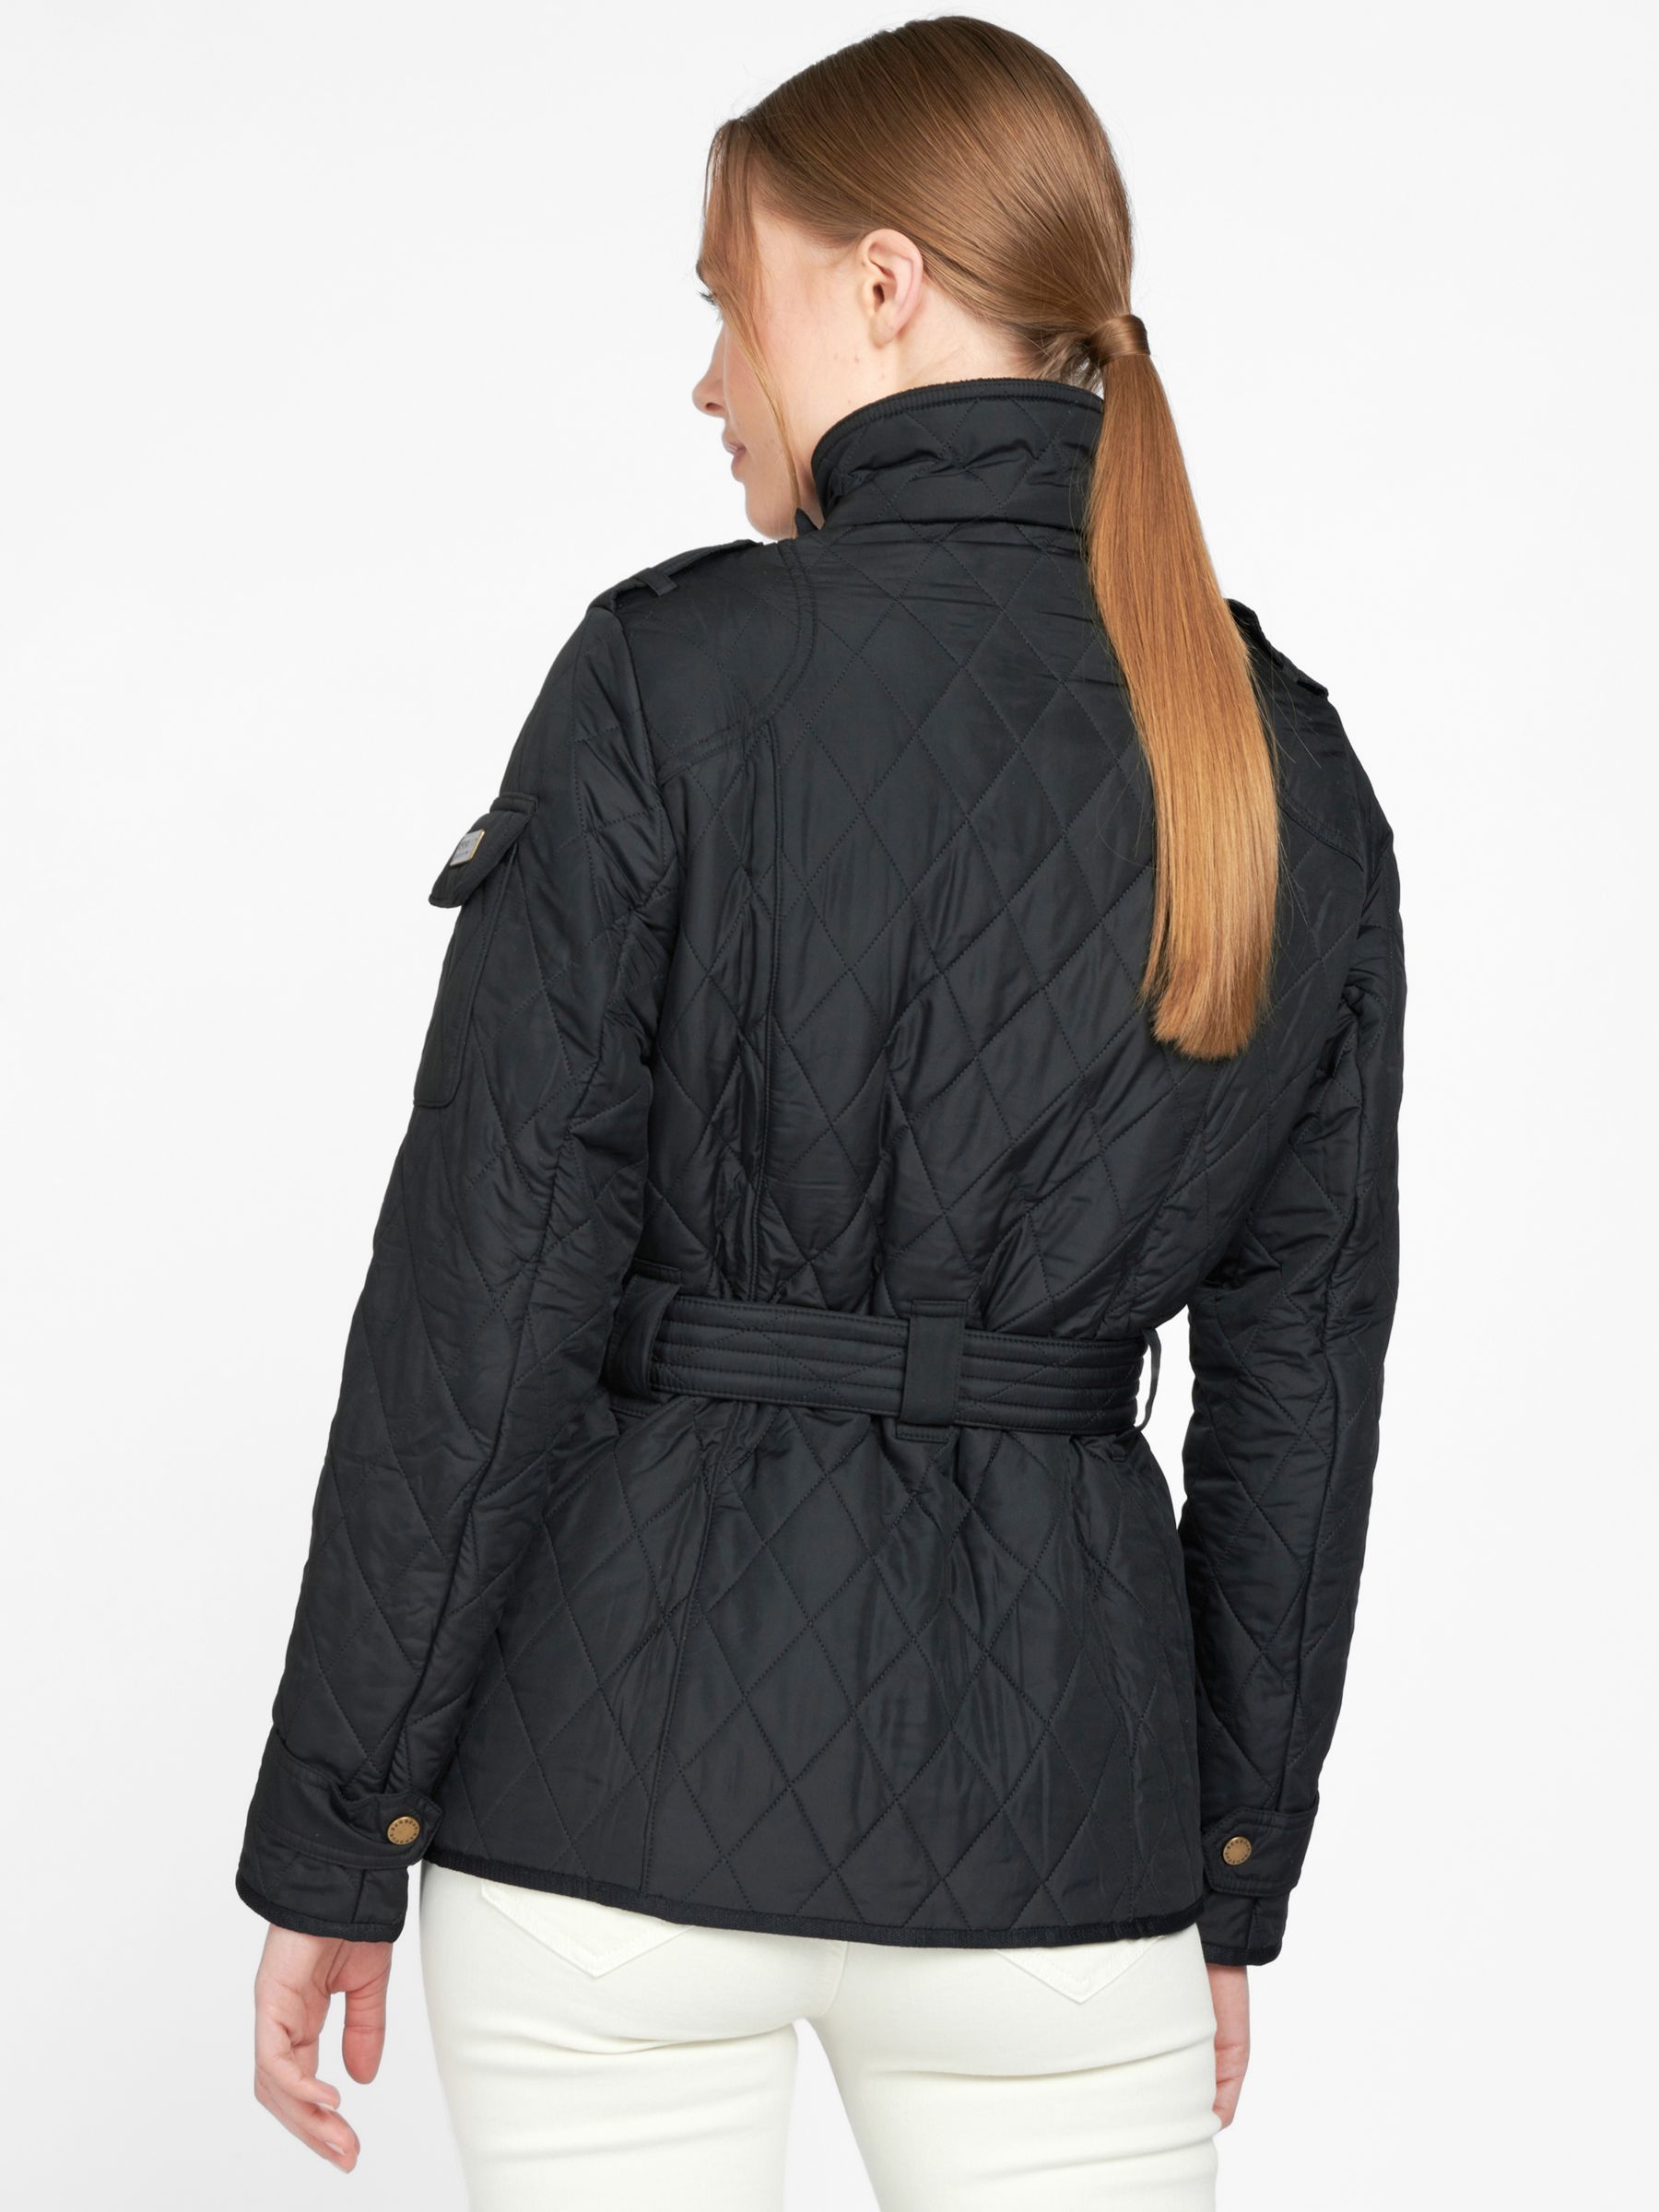 barbour international quilted jacket